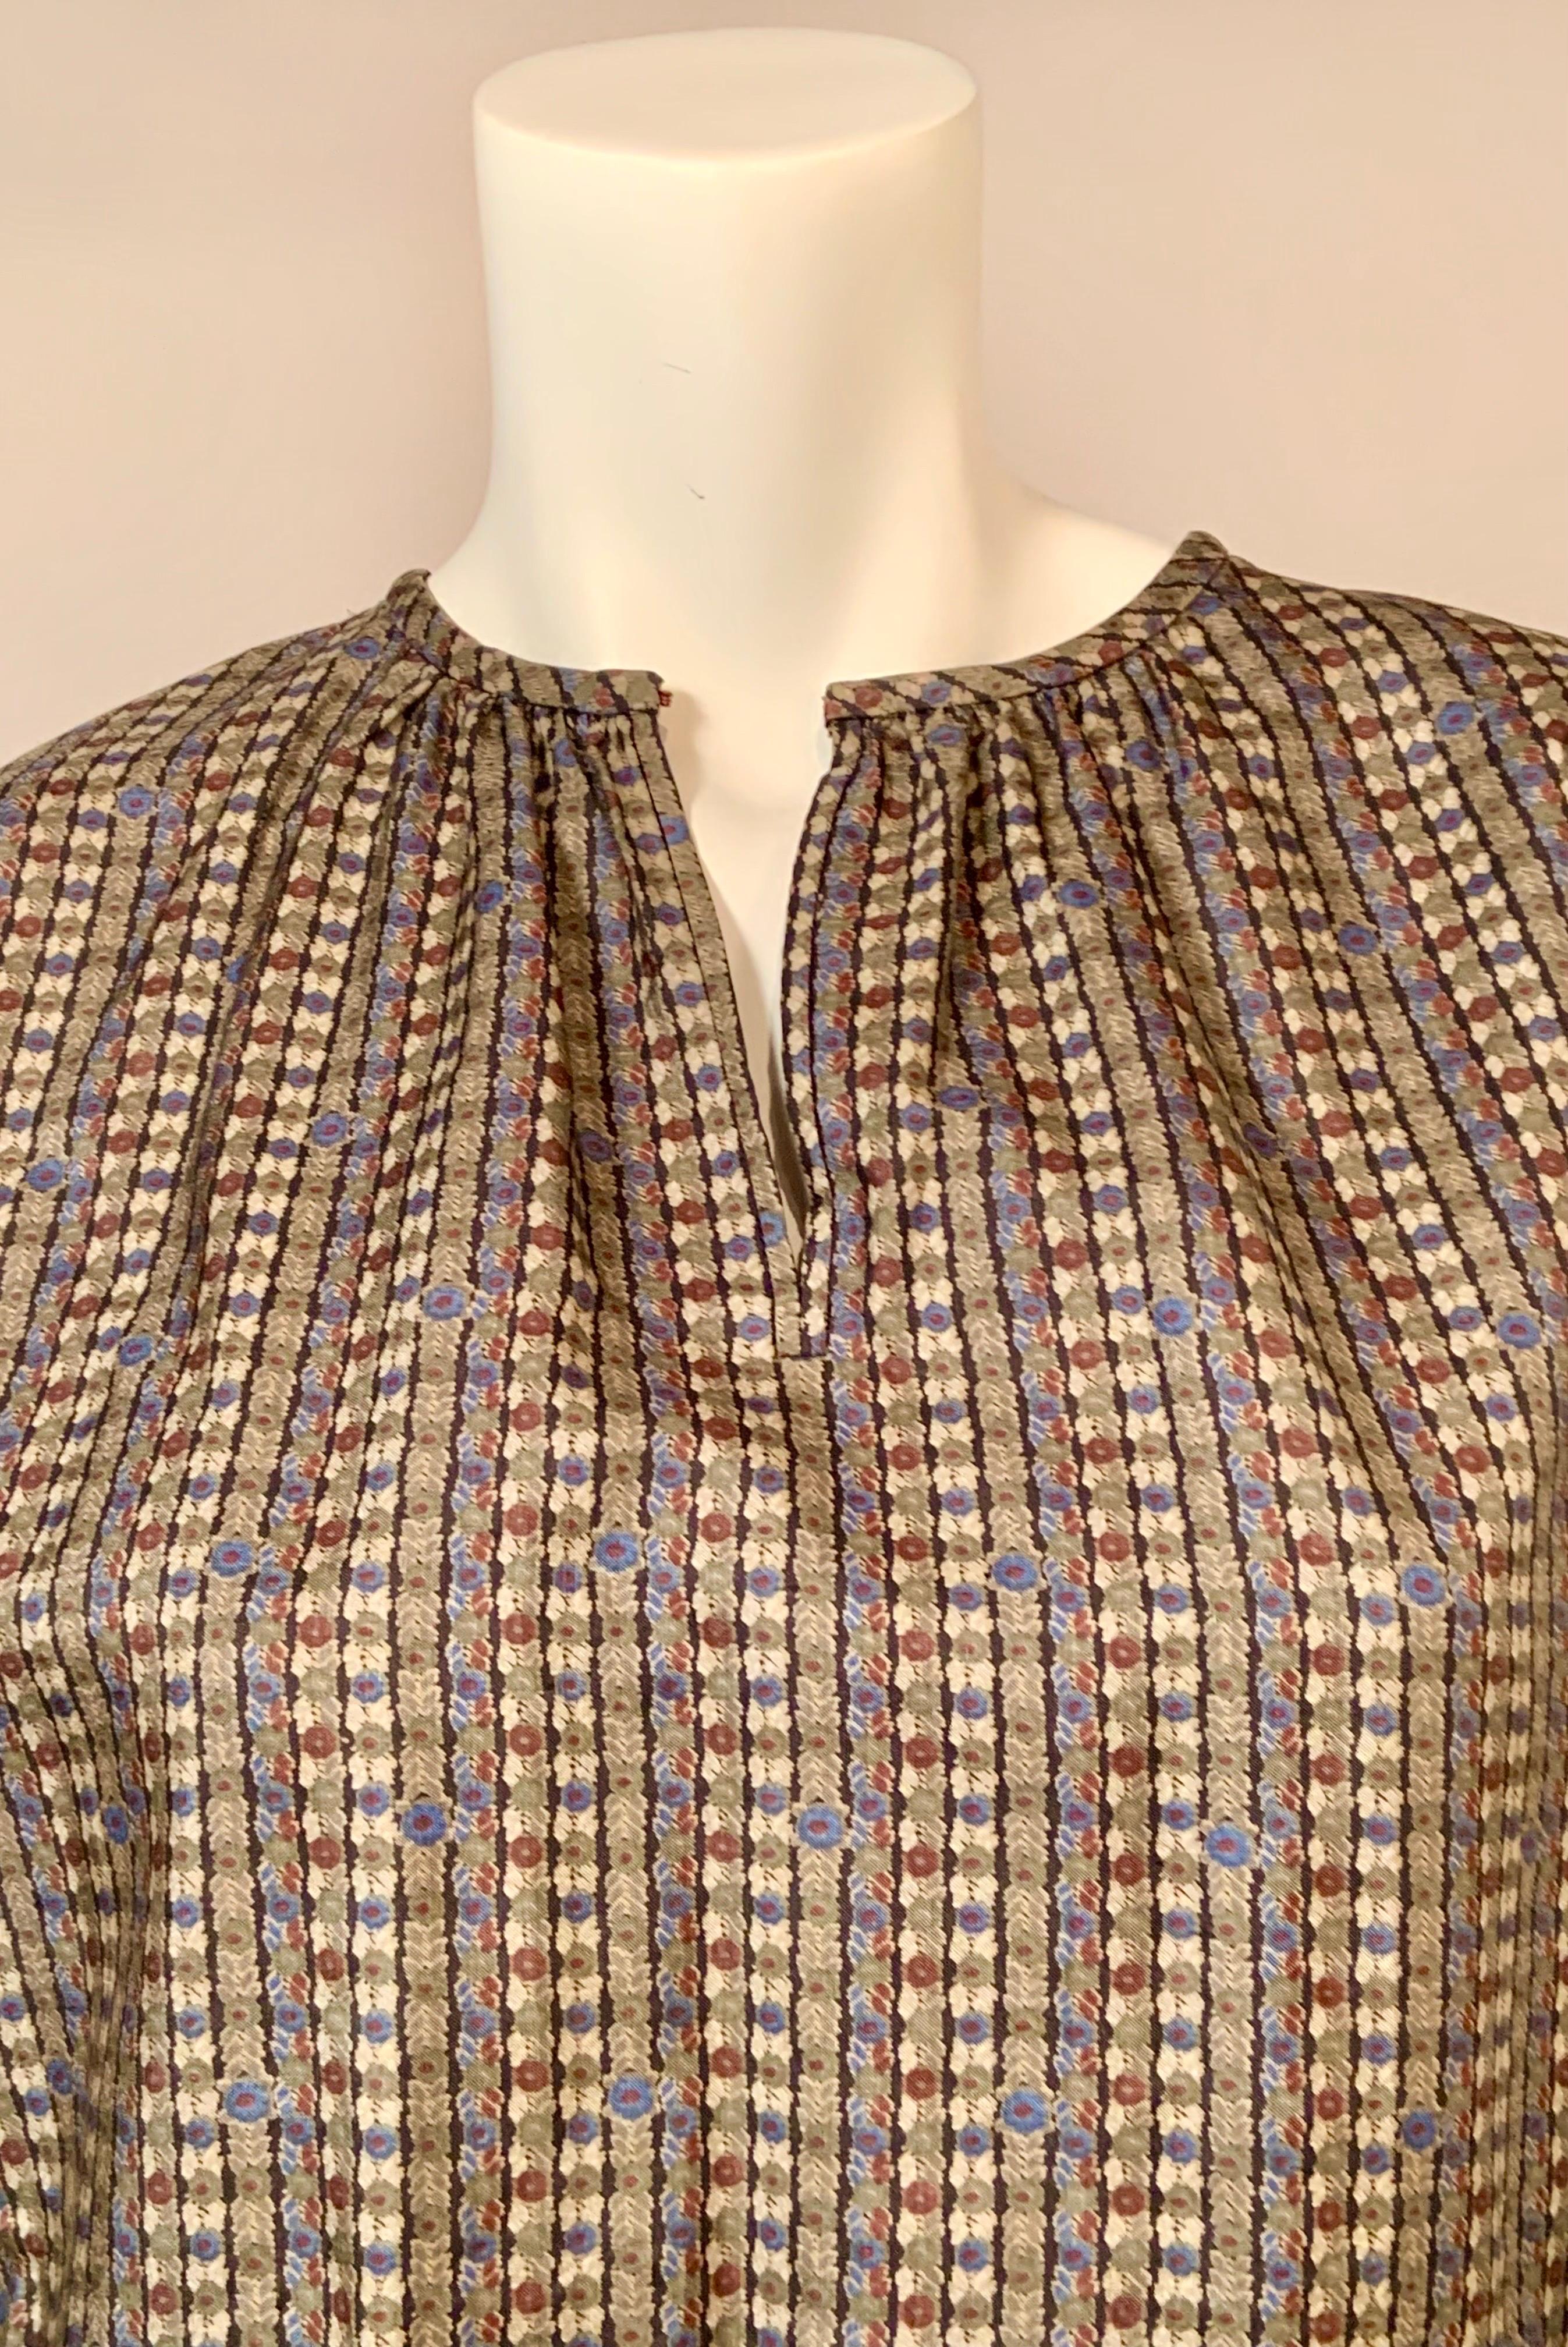 This printed silk peasant style blouse designed by Yves Saint Laurent for his Rive Gauche line has a neutral color pallet that will work with many pieces in your wardrobe.  The vertical print is divided by black lines.  There are shades of grey,